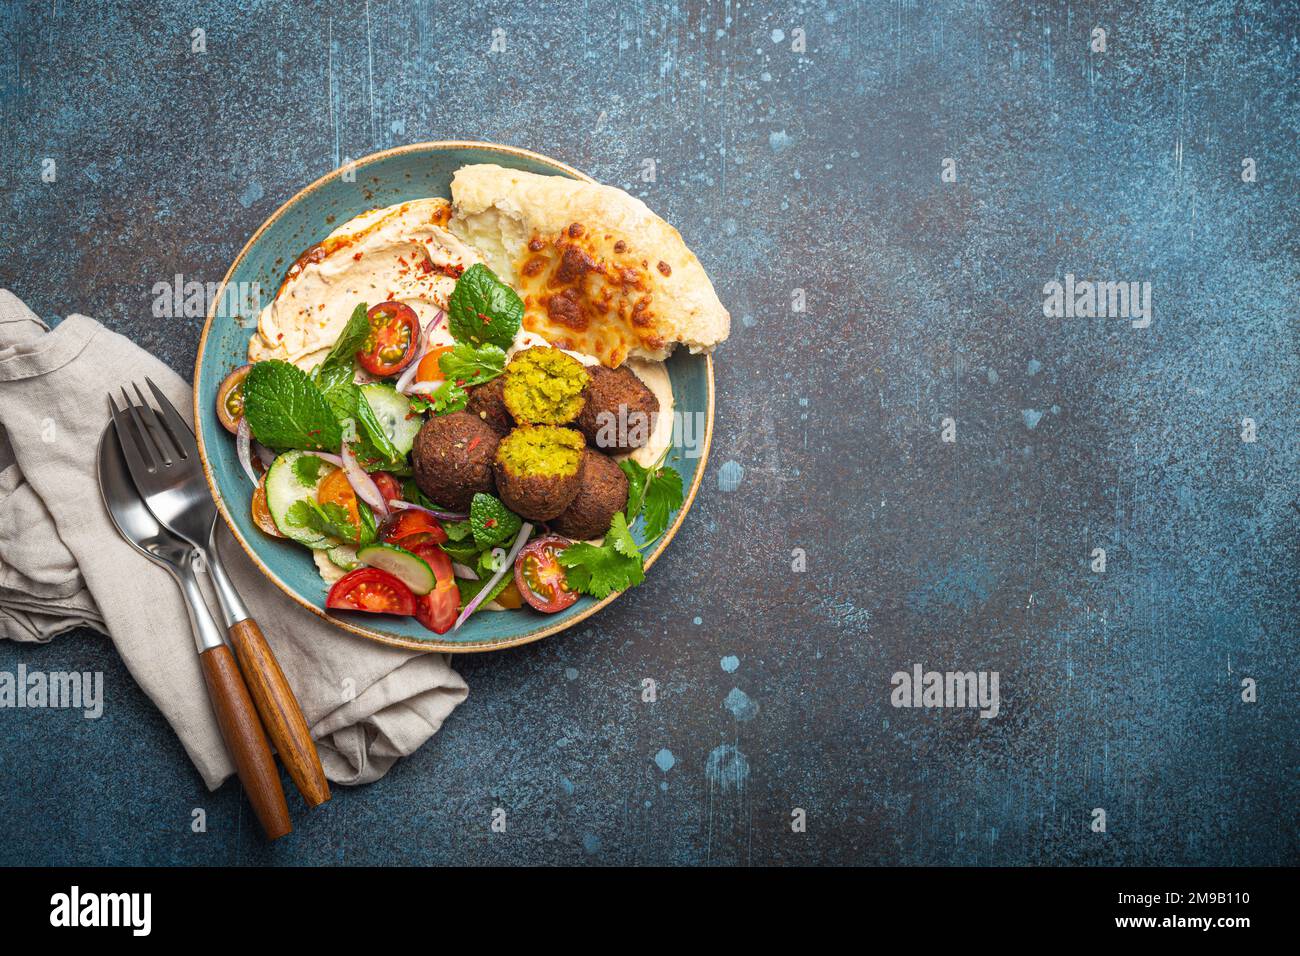 Middle Eastern Arab meal with fried falafel, hummus, vegetables salad, pita bread Stock Photo